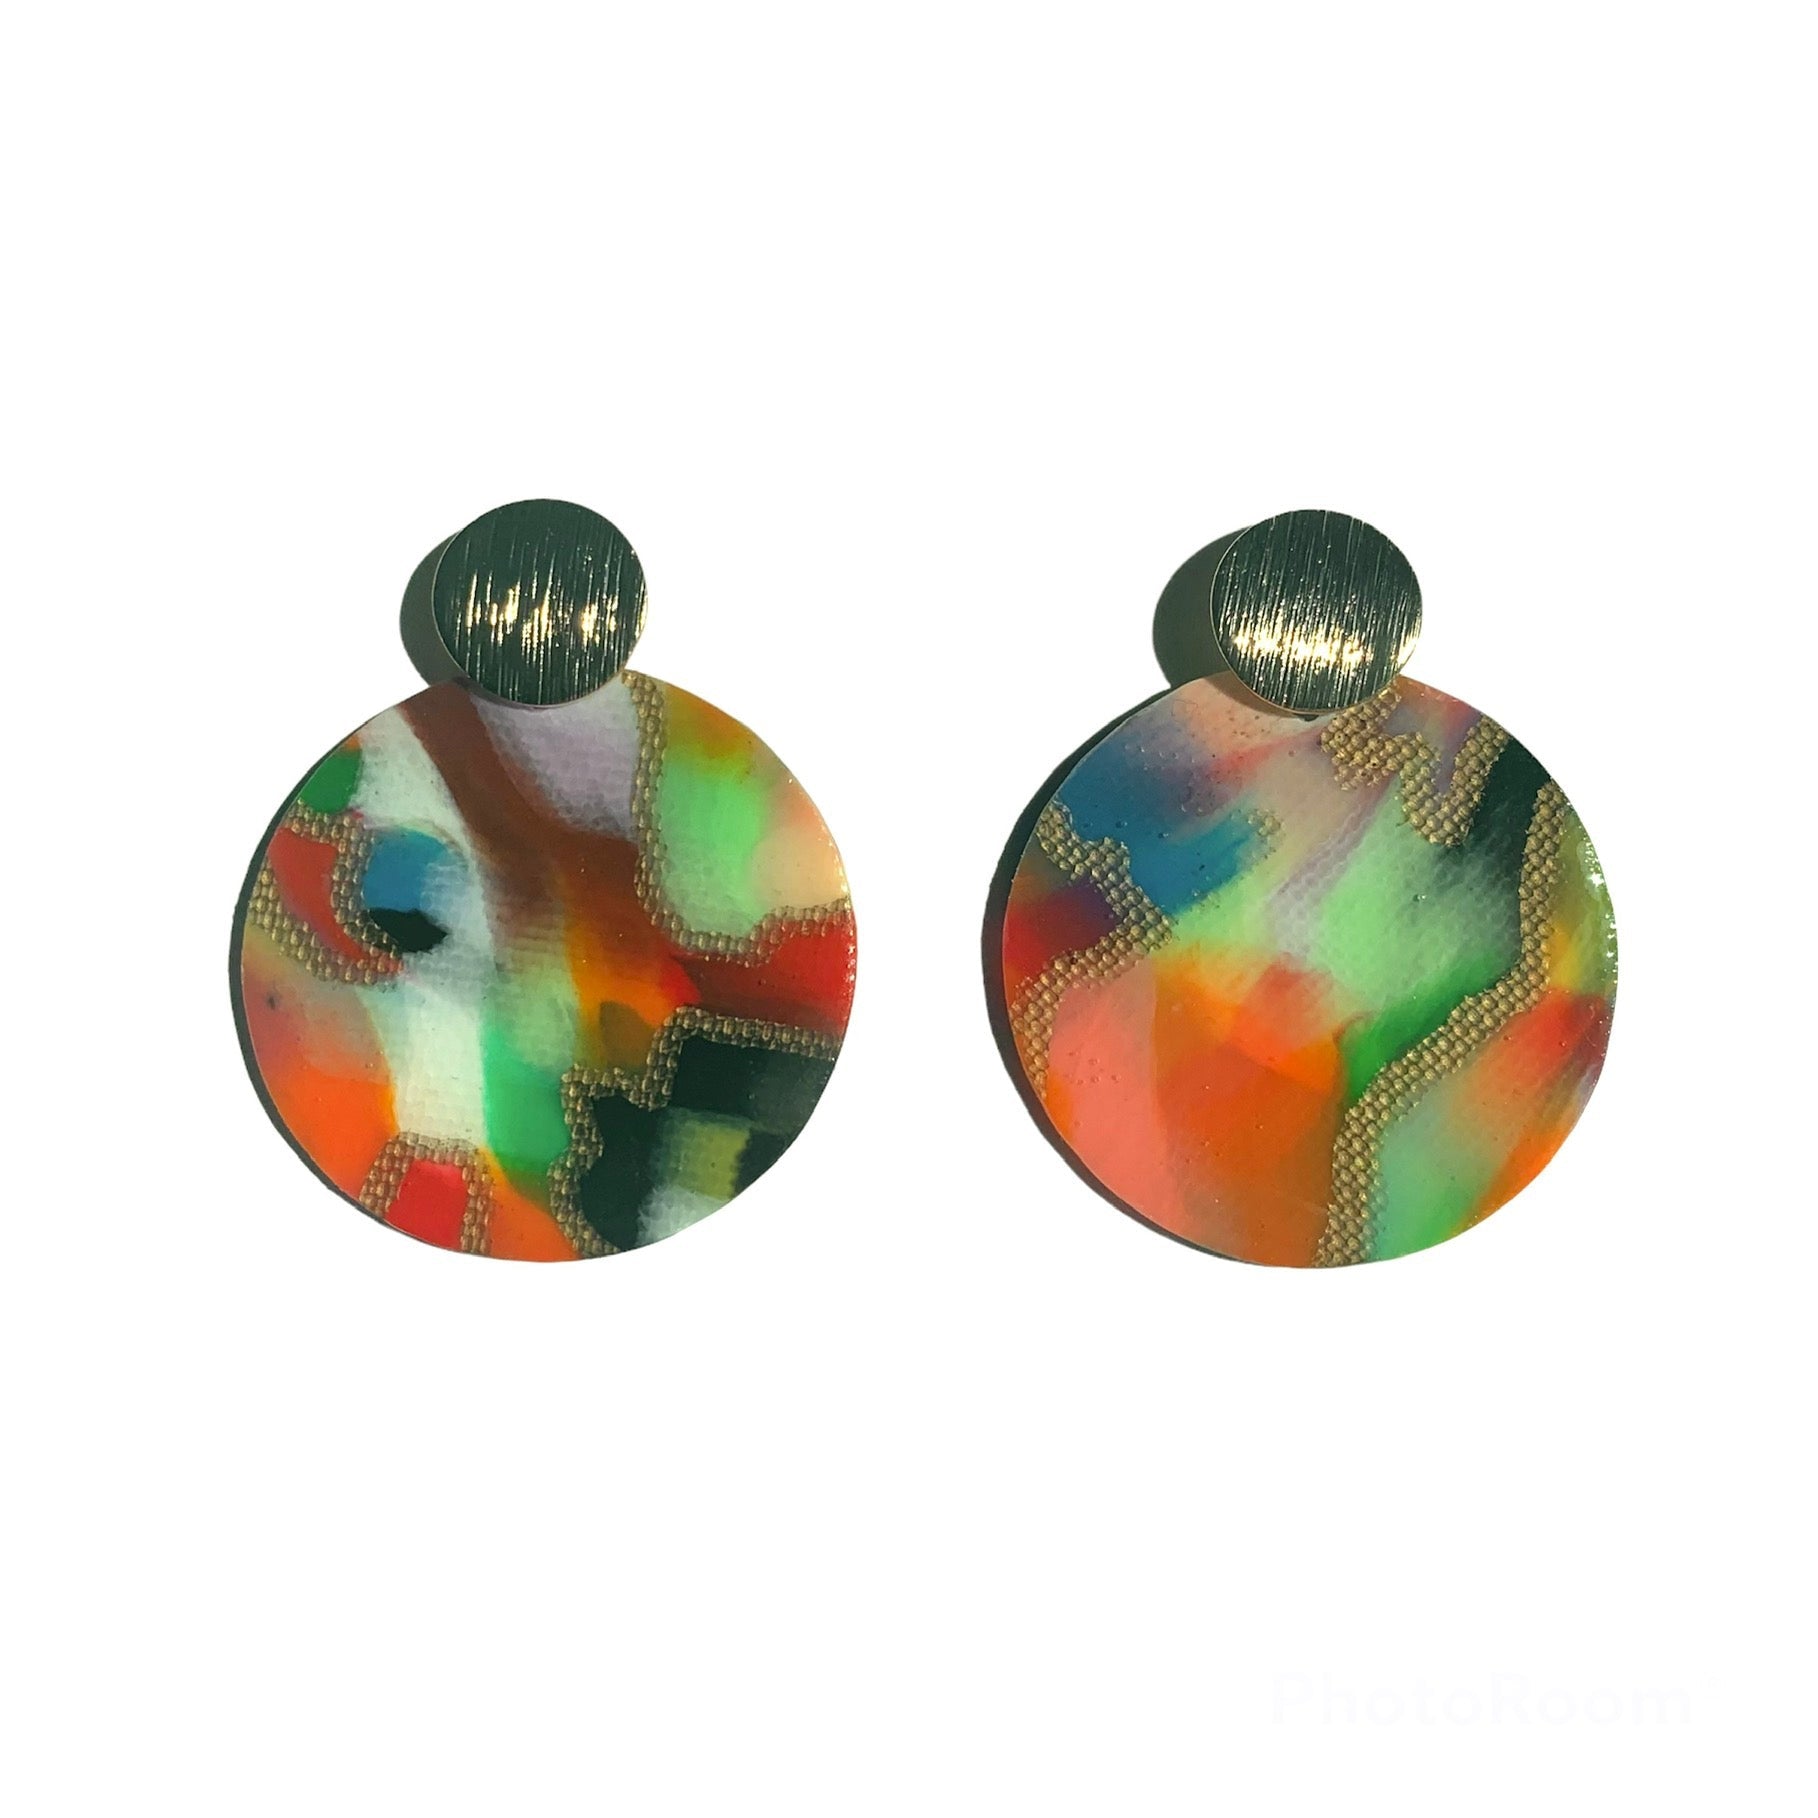 Sustainable Handmade Earrings Artesian Colourful Studs Recycled plastic eco friendly gift for her